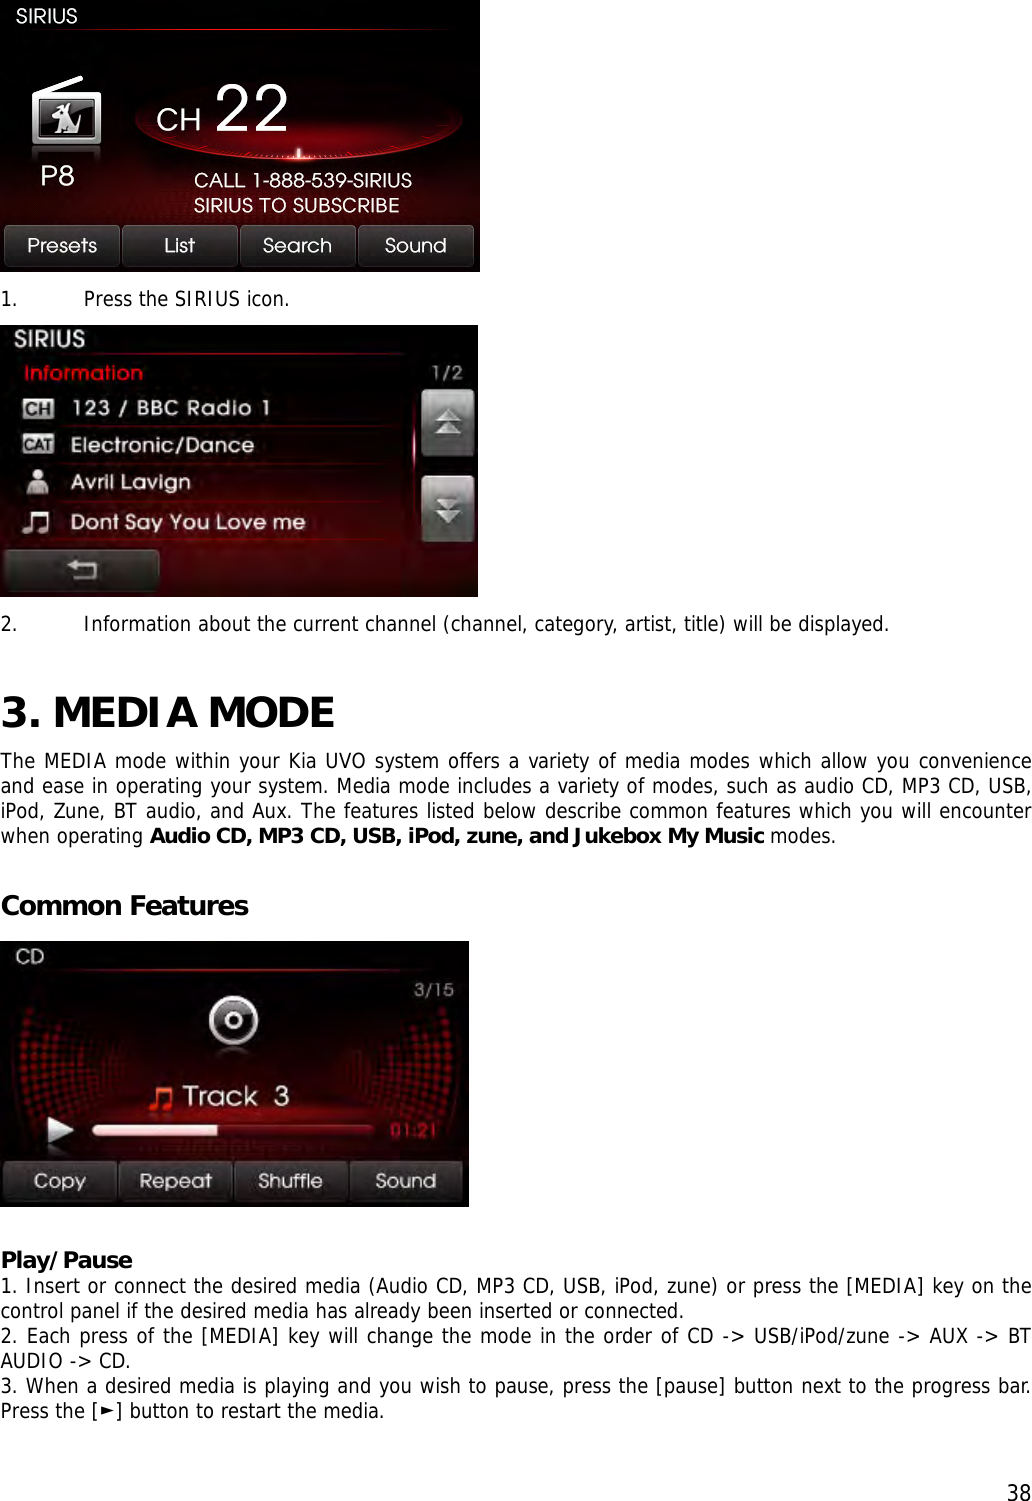  38 1. Press the SIRIUS icon.  2. Information about the current channel (channel, category, artist, title) will be displayed.  3. MEDIA MODE  The MEDIA mode within your Kia UVO system offers a variety of media modes which allow you convenience and ease in operating your system. Media mode includes a variety of modes, such as audio CD, MP3 CD, USB, iPod, Zune, BT audio, and Aux. The features listed below describe common features which you will encounter when operating Audio CD, MP3 CD, USB, iPod, zune, and Jukebox My Music modes.  Common Features   Play/Pause 1. Insert or connect the desired media (Audio CD, MP3 CD, USB, iPod, zune) or press the [MEDIA] key on the control panel if the desired media has already been inserted or connected. 2. Each press of the [MEDIA] key will change the mode in the order of CD -&gt; USB/iPod/zune -&gt; AUX -&gt; BT AUDIO -&gt; CD. 3. When a desired media is playing and you wish to pause, press the [pause] button next to the progress bar. Press the [ ] button to ►restart the media.  